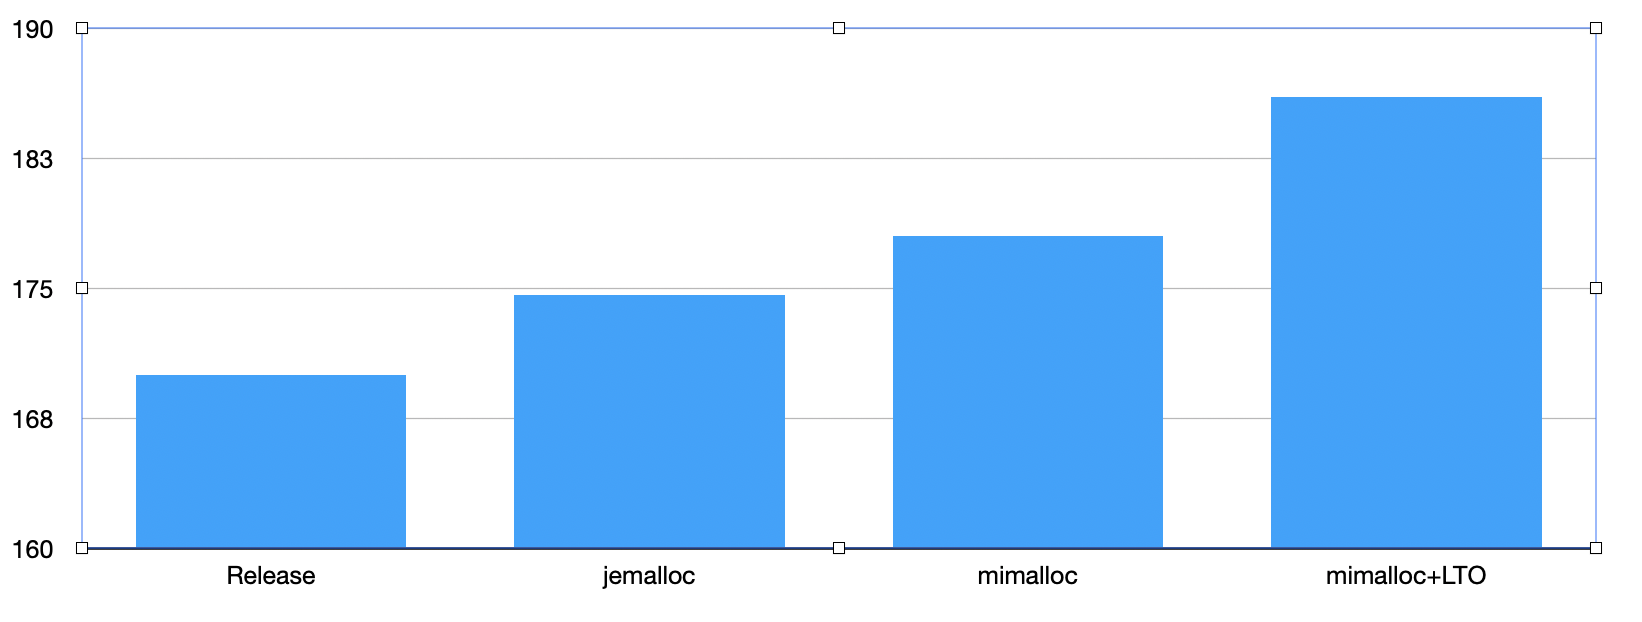 Comparison graph showing release flag traffic vs release flag with jemalloc and mimalloc.